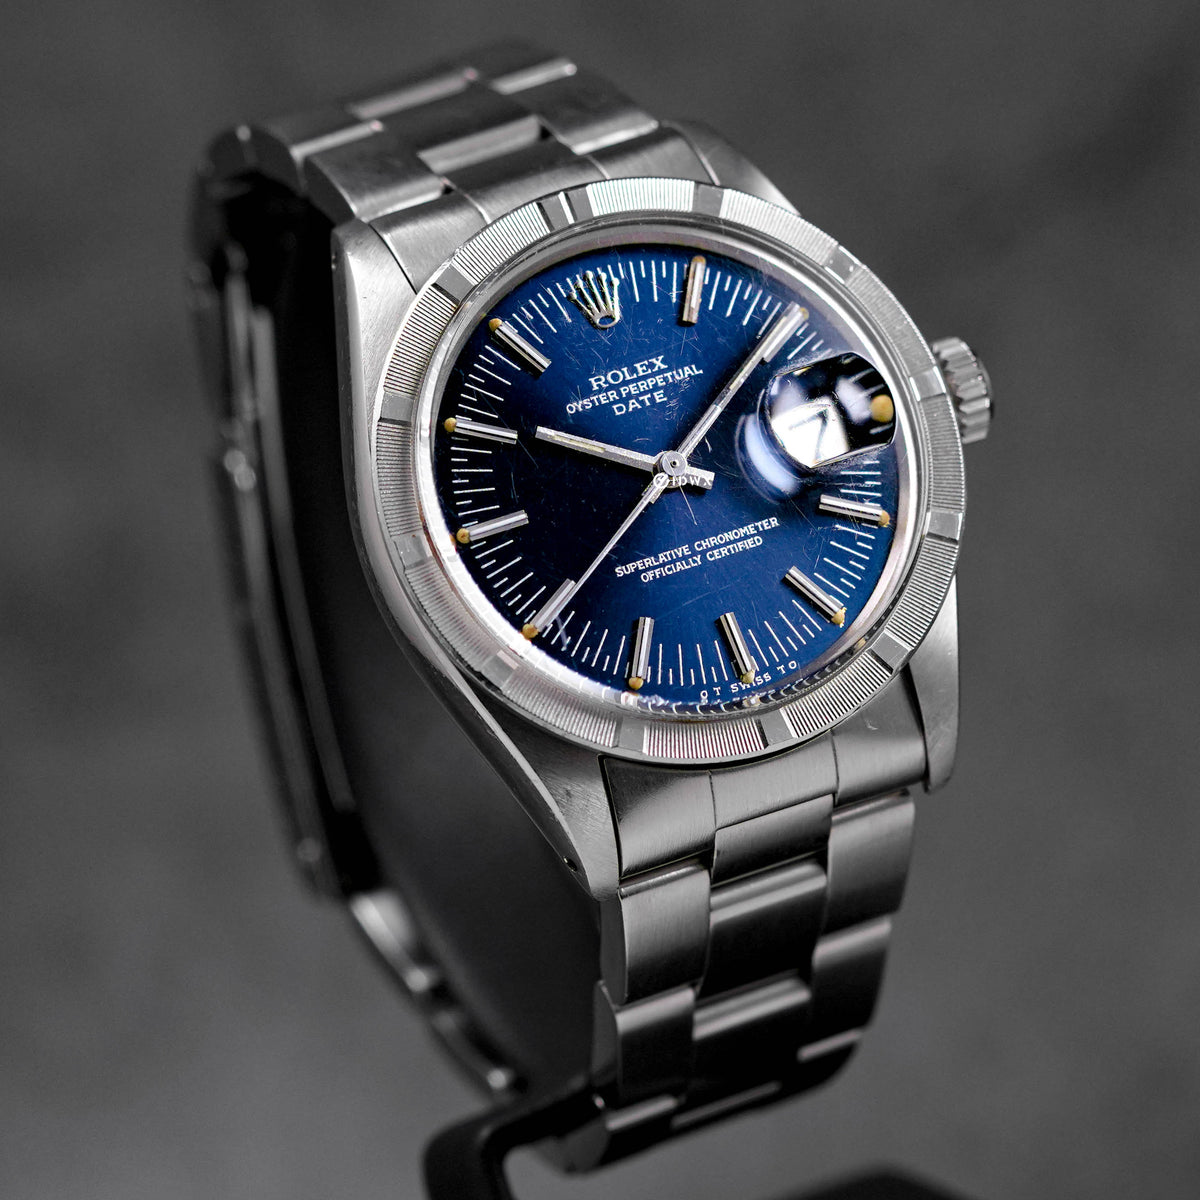 OYSTER PERPETUAL DATE 34MM BLUE RADIAL DIAL (WATCH ONLY-CIRCA 1973)